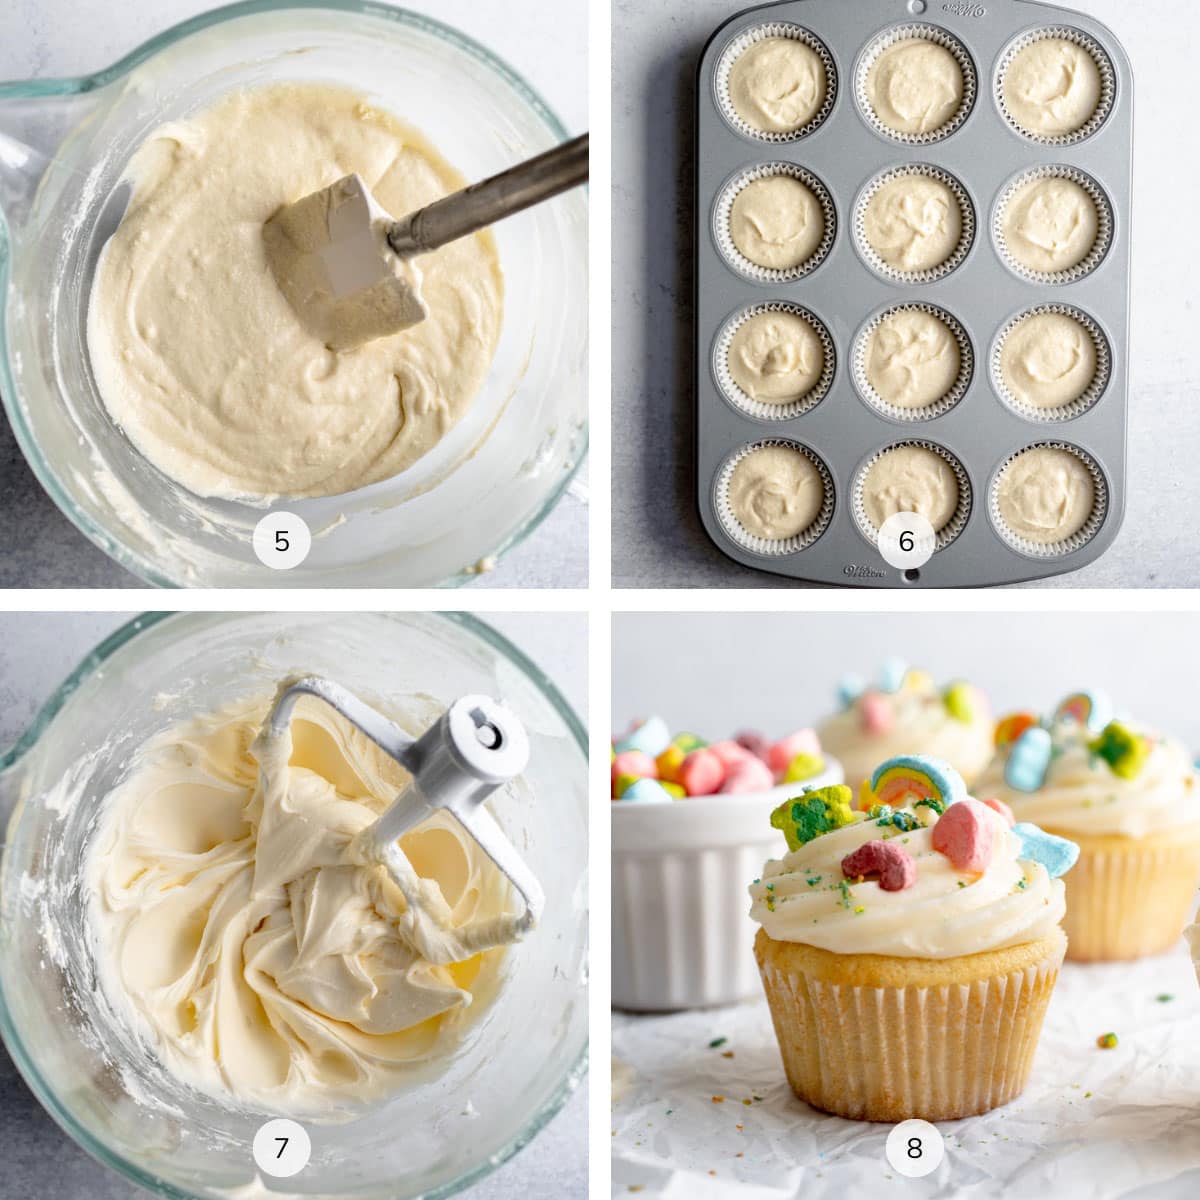 Photos showing the steps of making Lucky Charms cupcakes labeled 5, 6, 7, 8